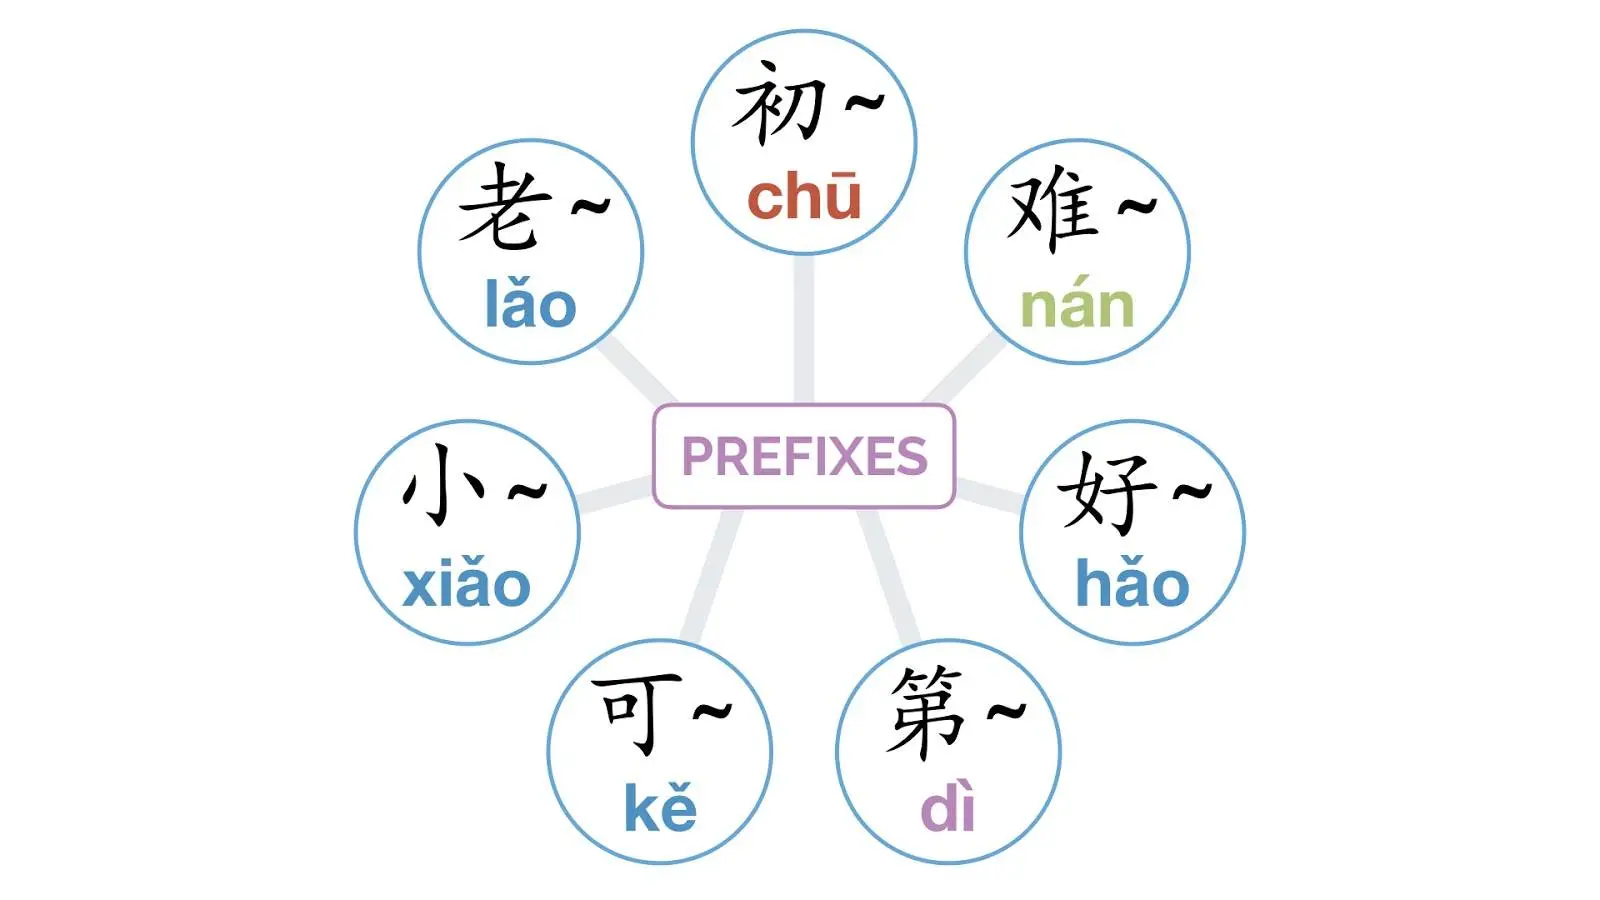 Chinese Prefixes, Chinese Prefixes, Suffixes, and Infixes: All You Need to Know About Affixes